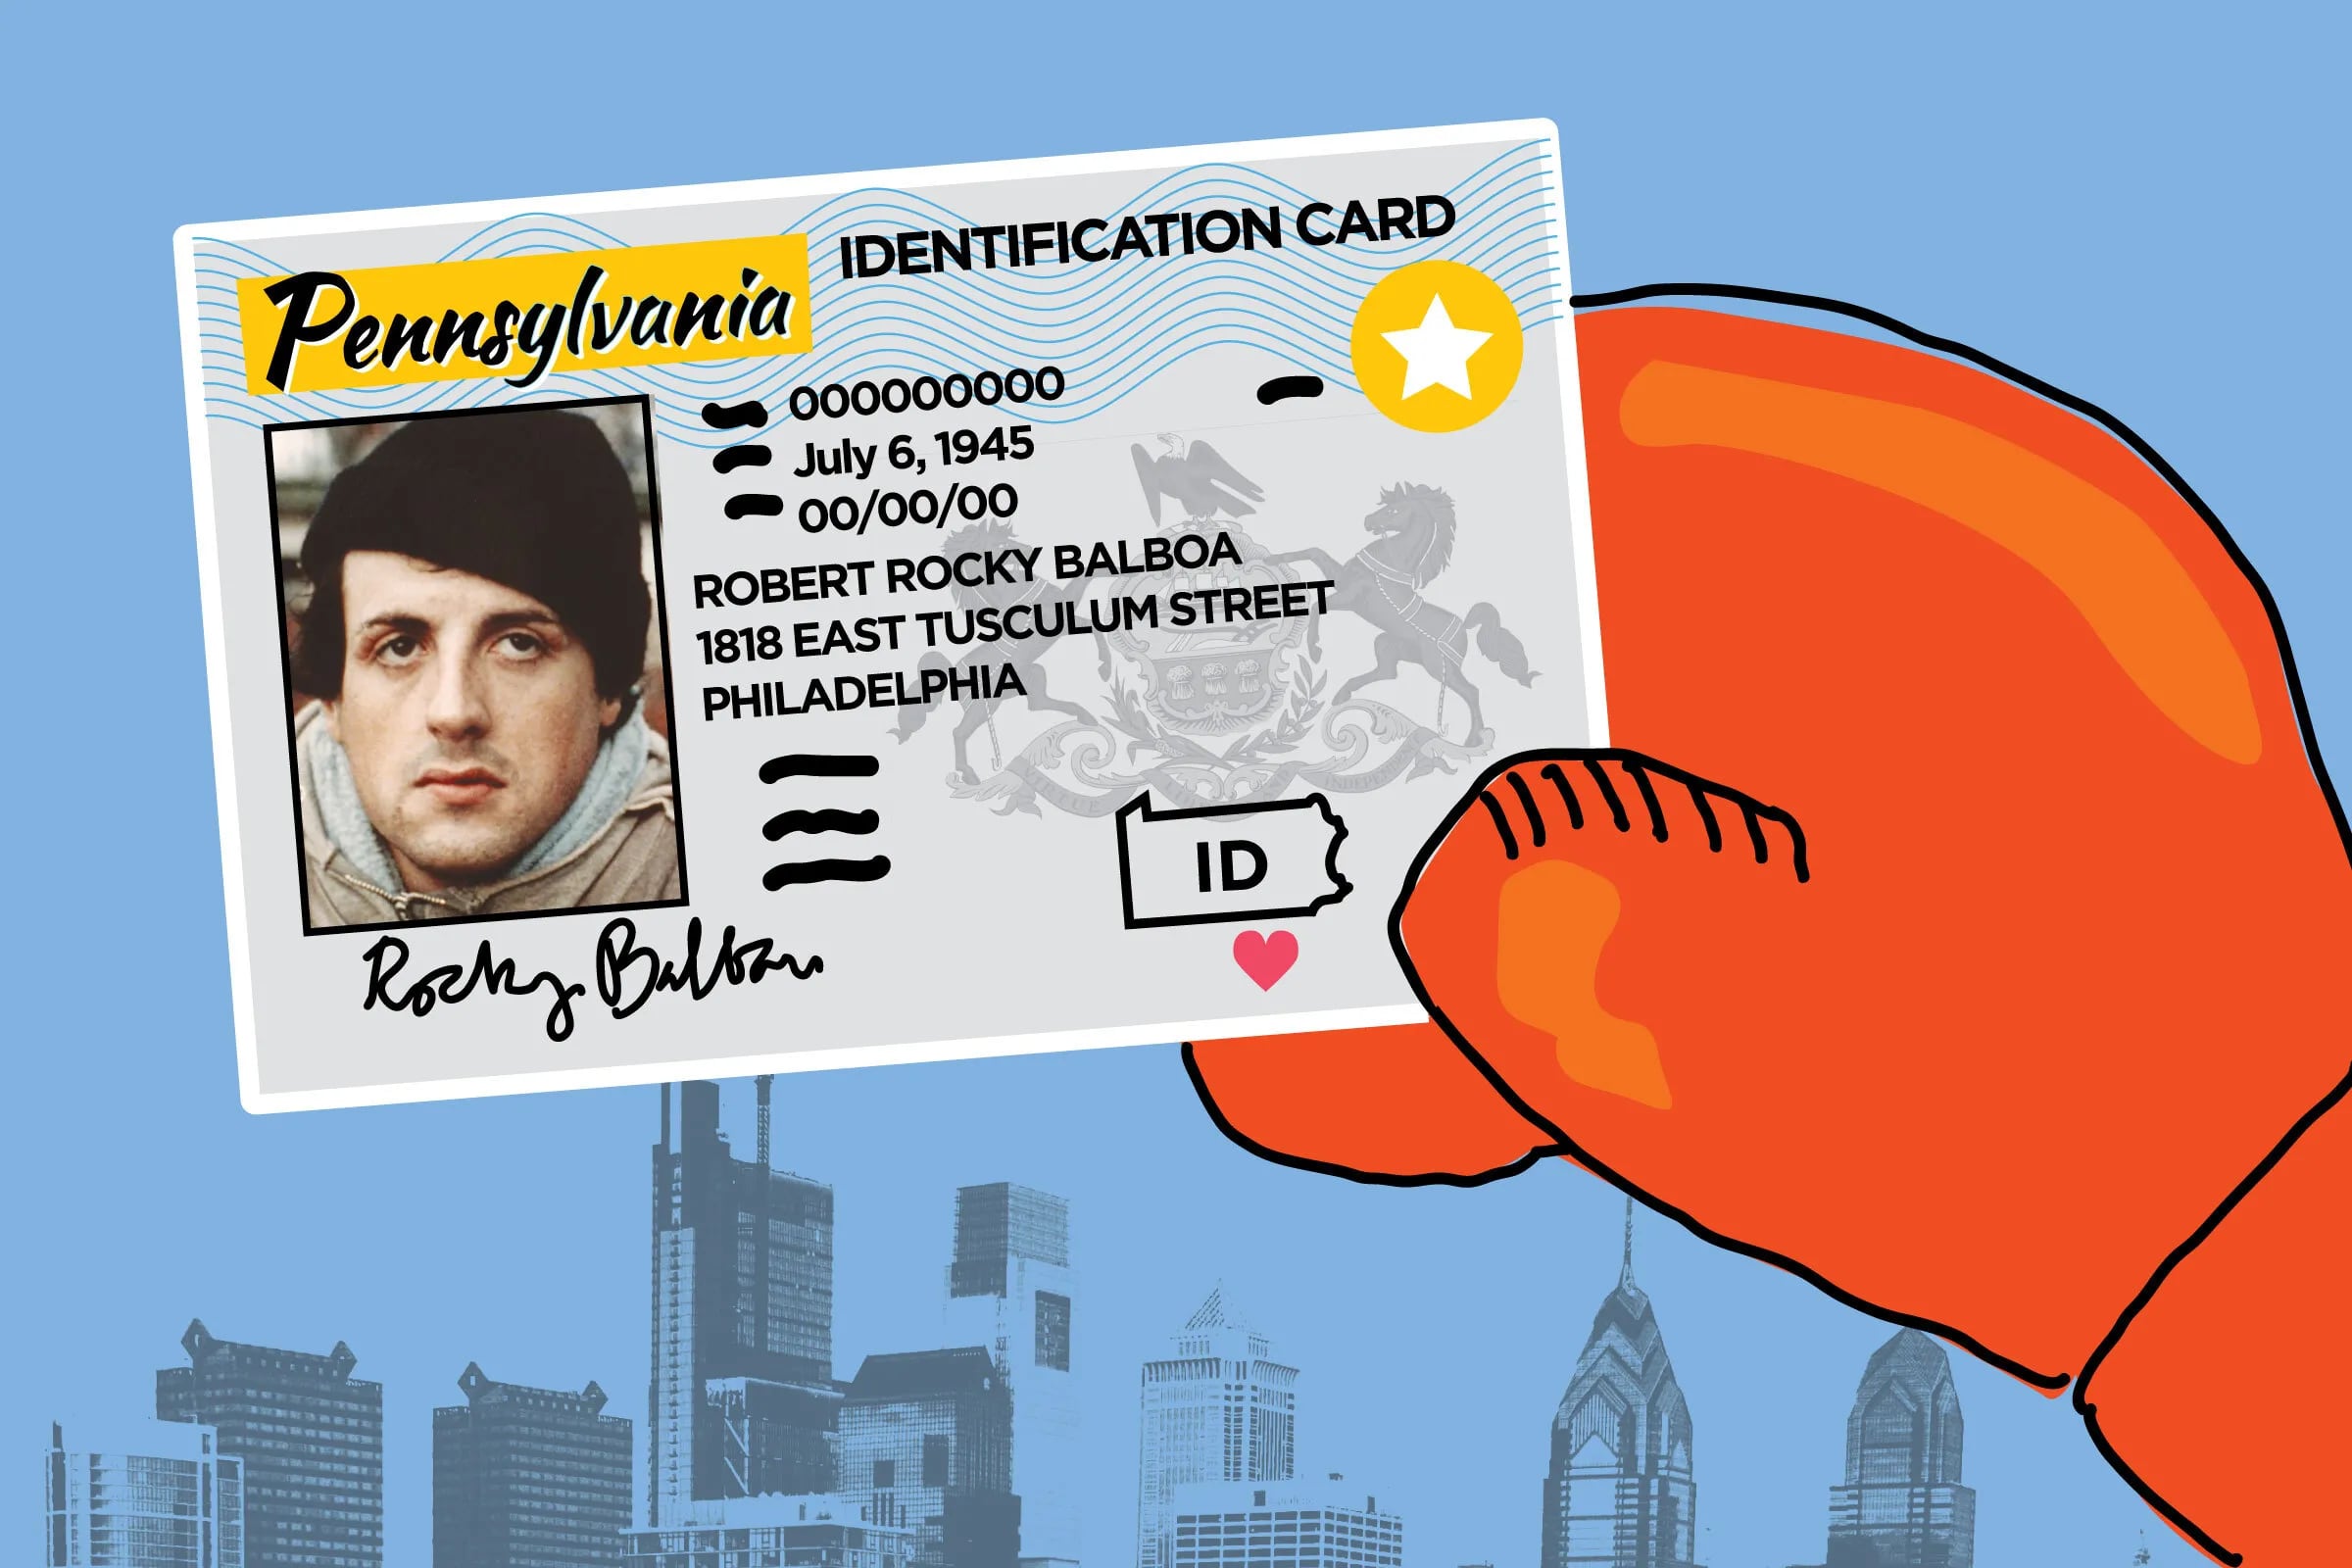 Rocky Balboa's REAL ID. A state ID that has a gold star in the upper-right hand corner means that it's a REAL ID.